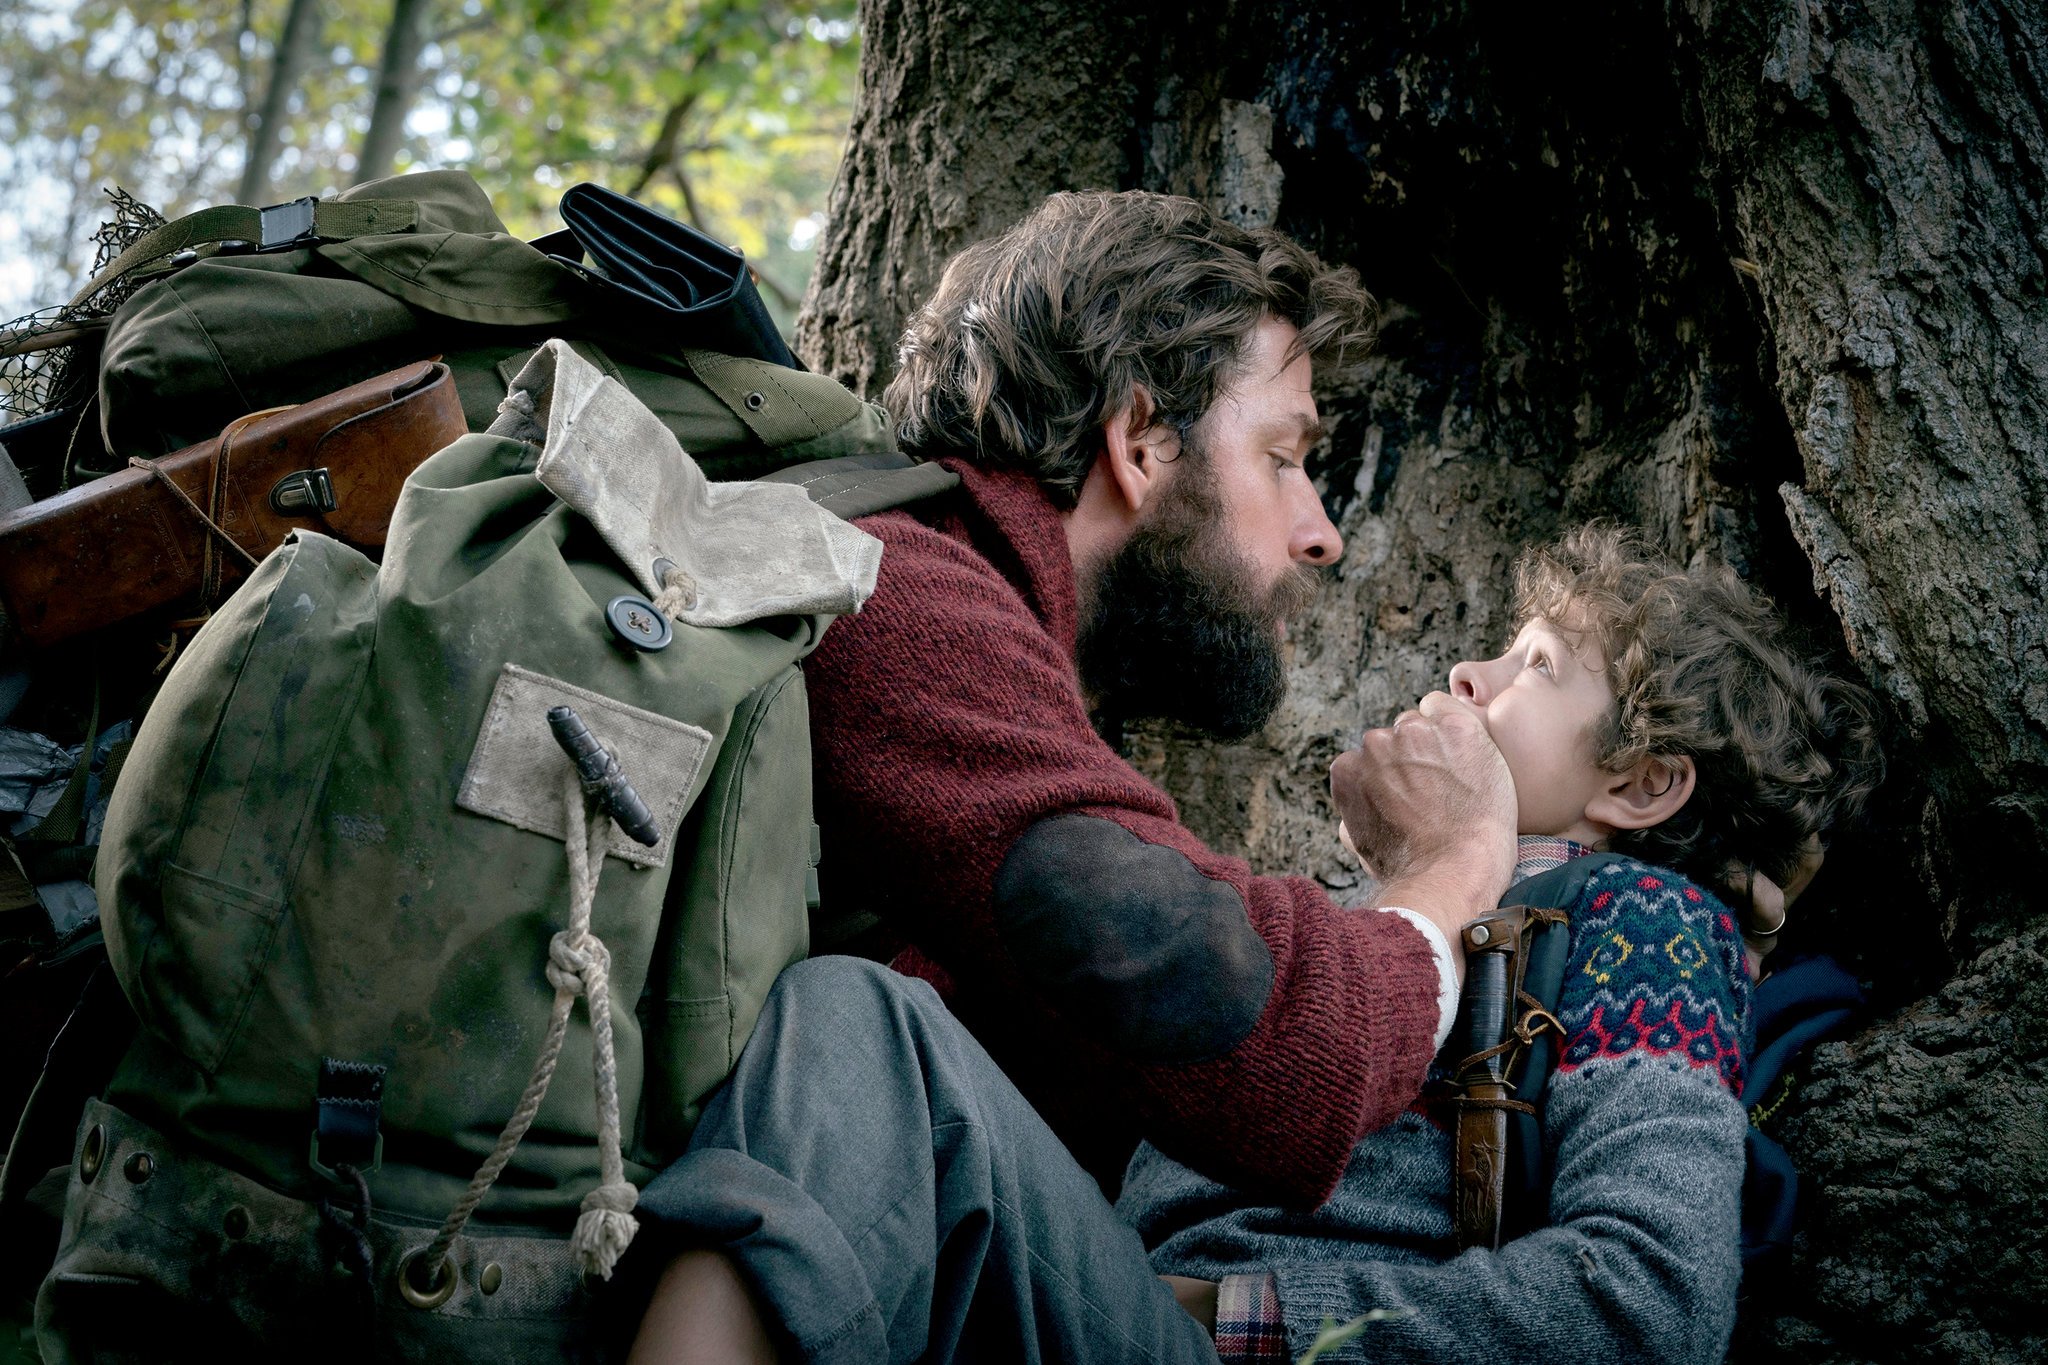 The Greatest Accomplishment of 'A Quiet Place' is Getting Audiences to